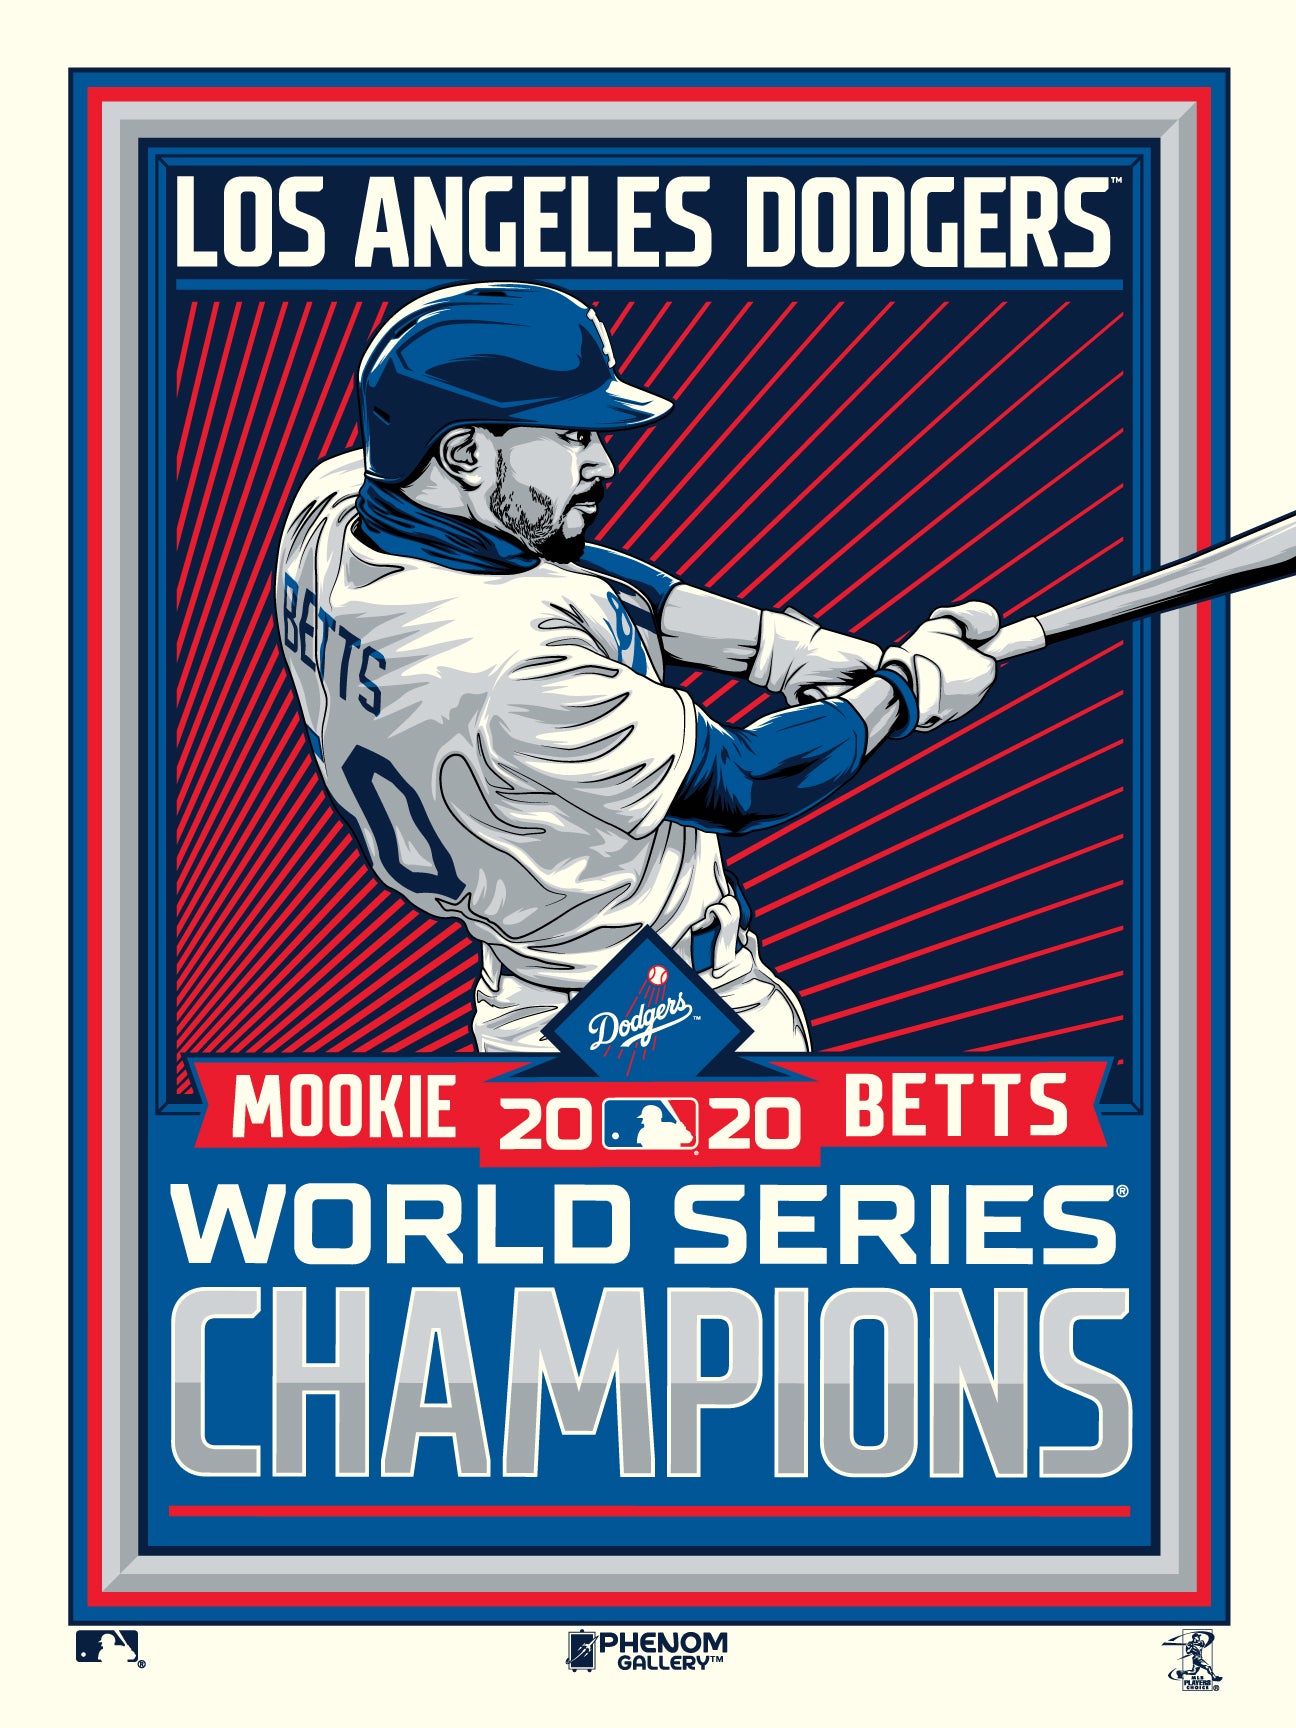 Mookie Betts Los Angeles Dodgers Fanatics Authentic Autographed 16 x 20  2020 World Series Champions Hitting Photograph